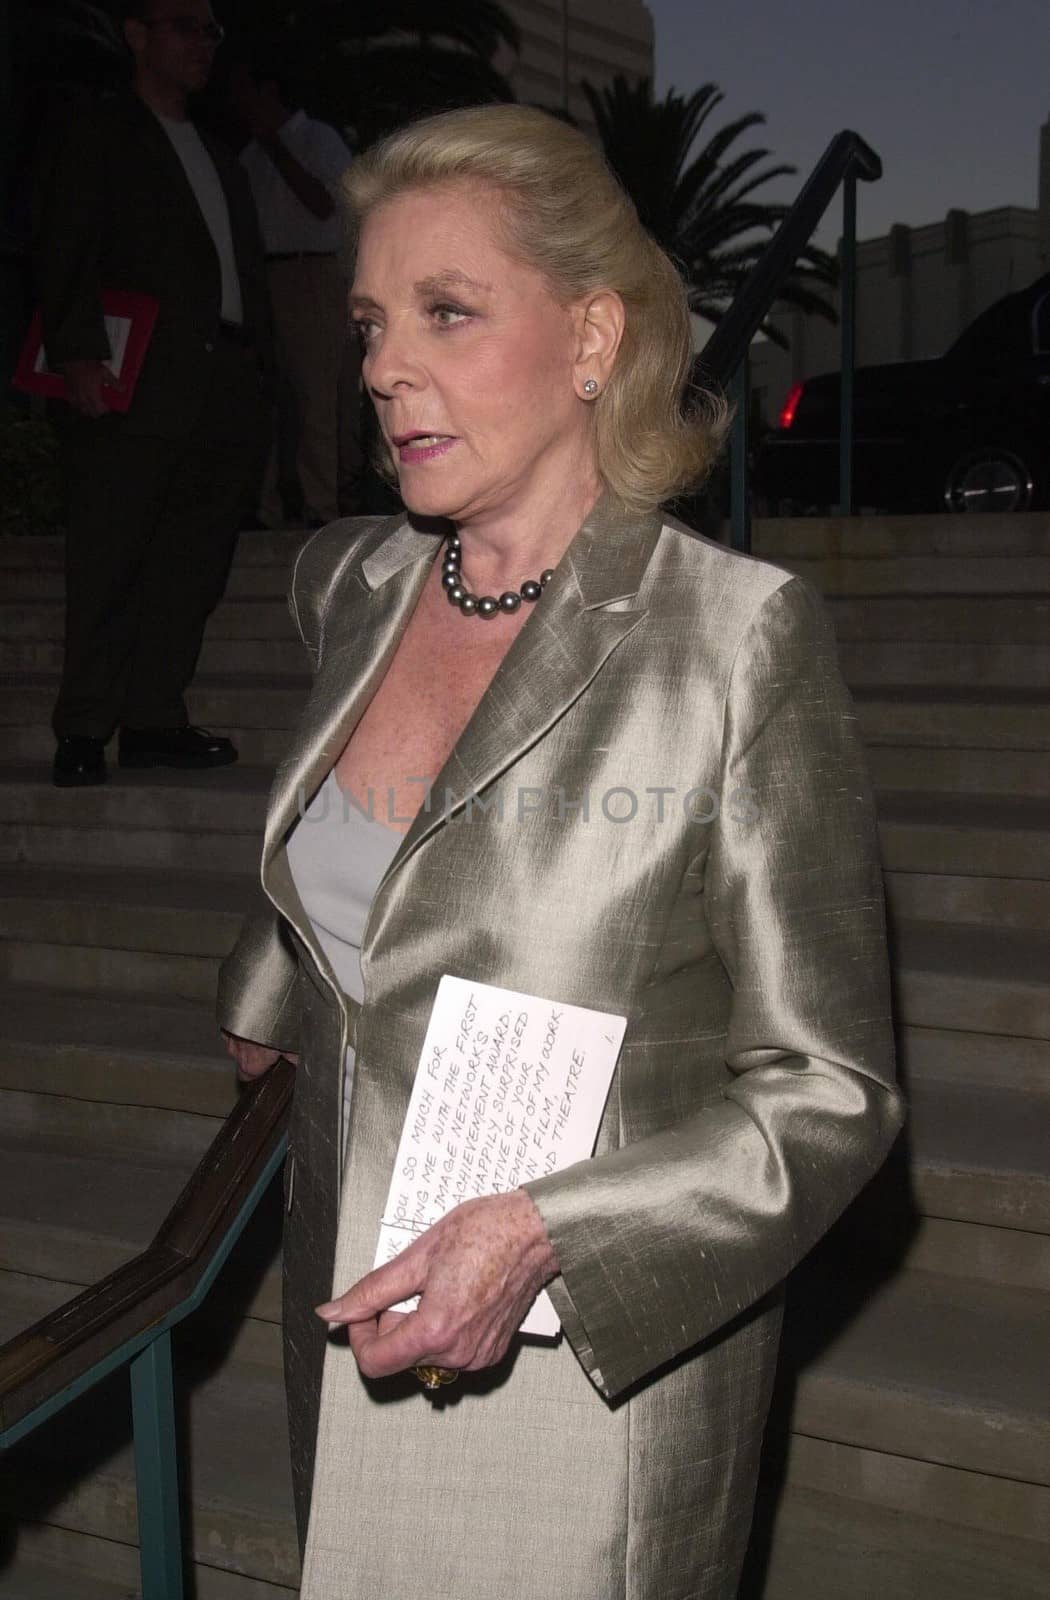 Lauren Bacall at the WinFemme 2000 Film Festival's closing ceremony in Beverly Hills. 08-20-00